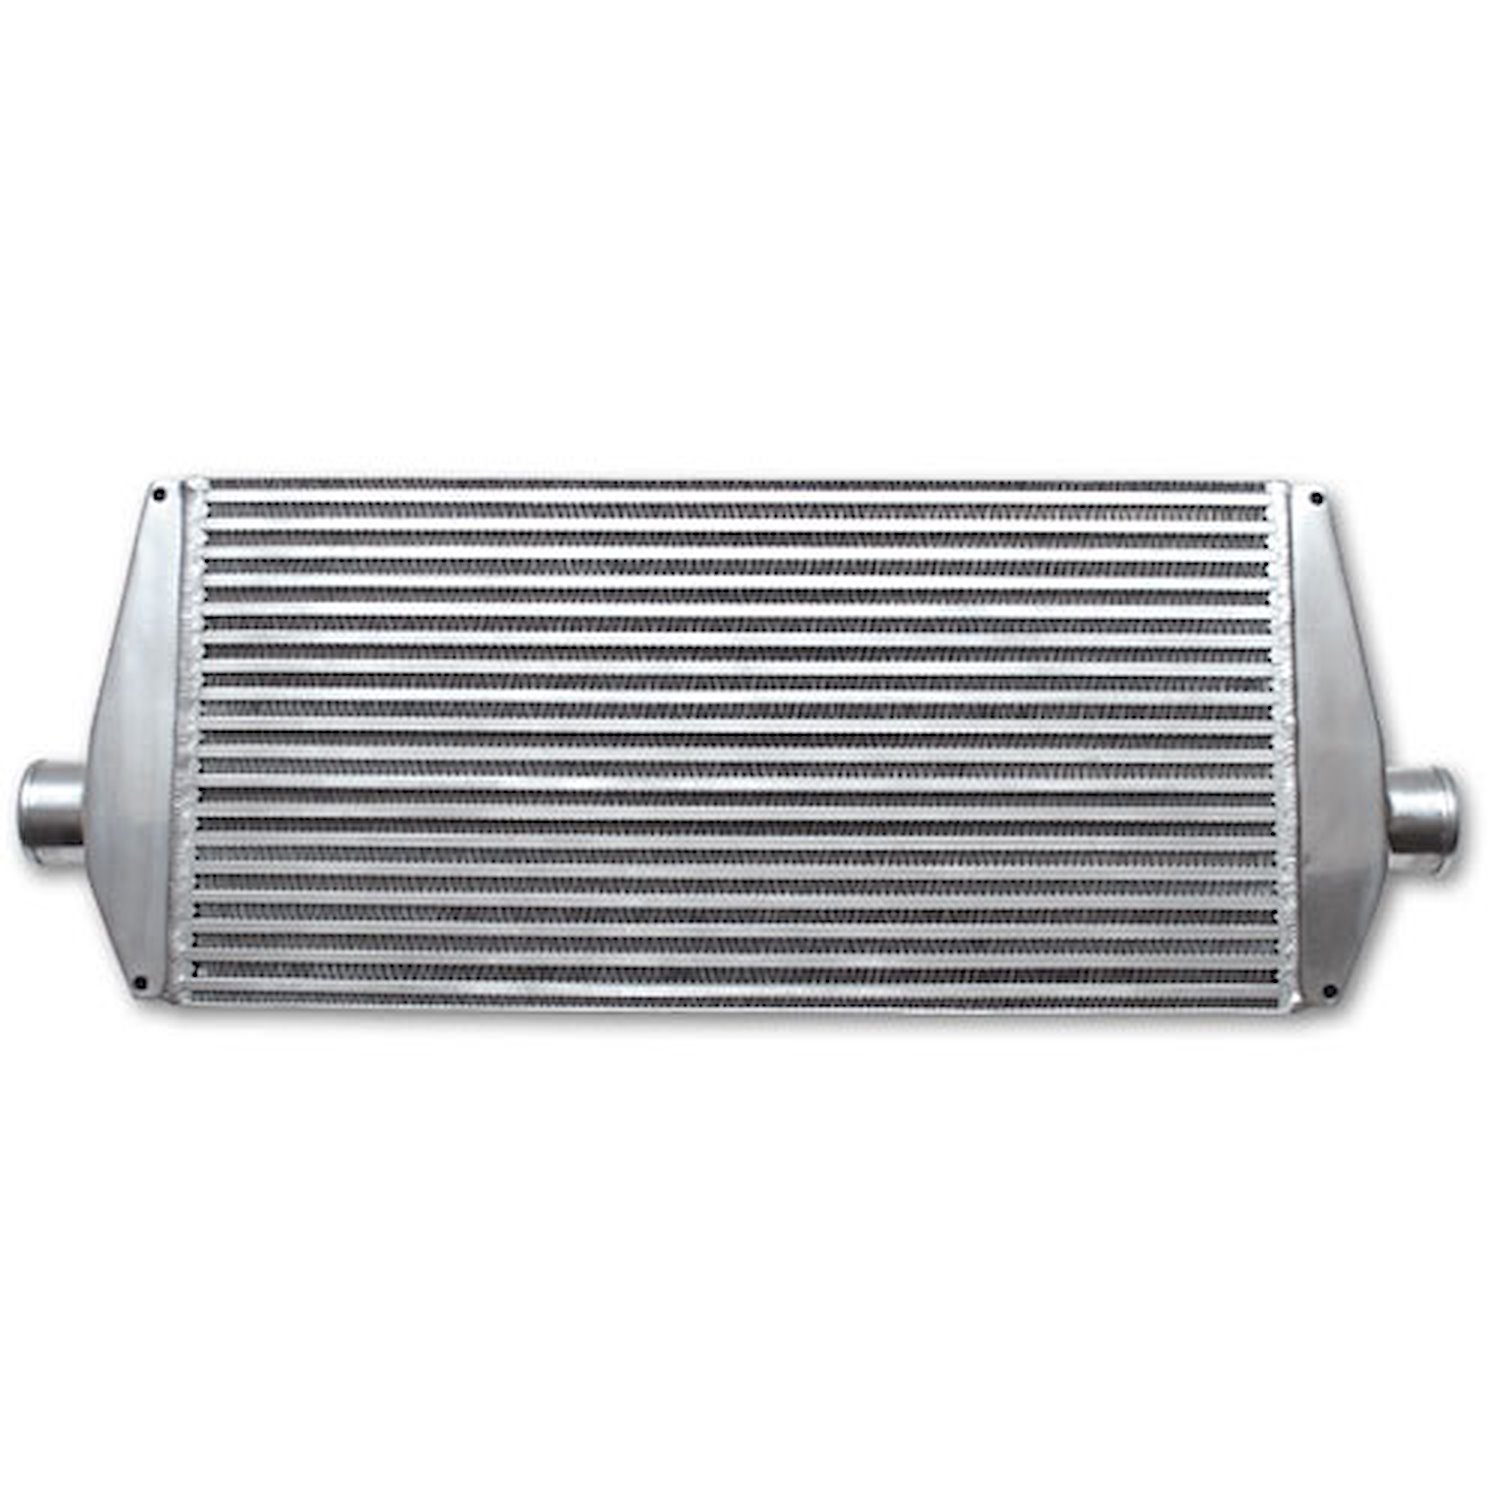 Air-to-Air Intercooler with End Tanks HP Rating: 875